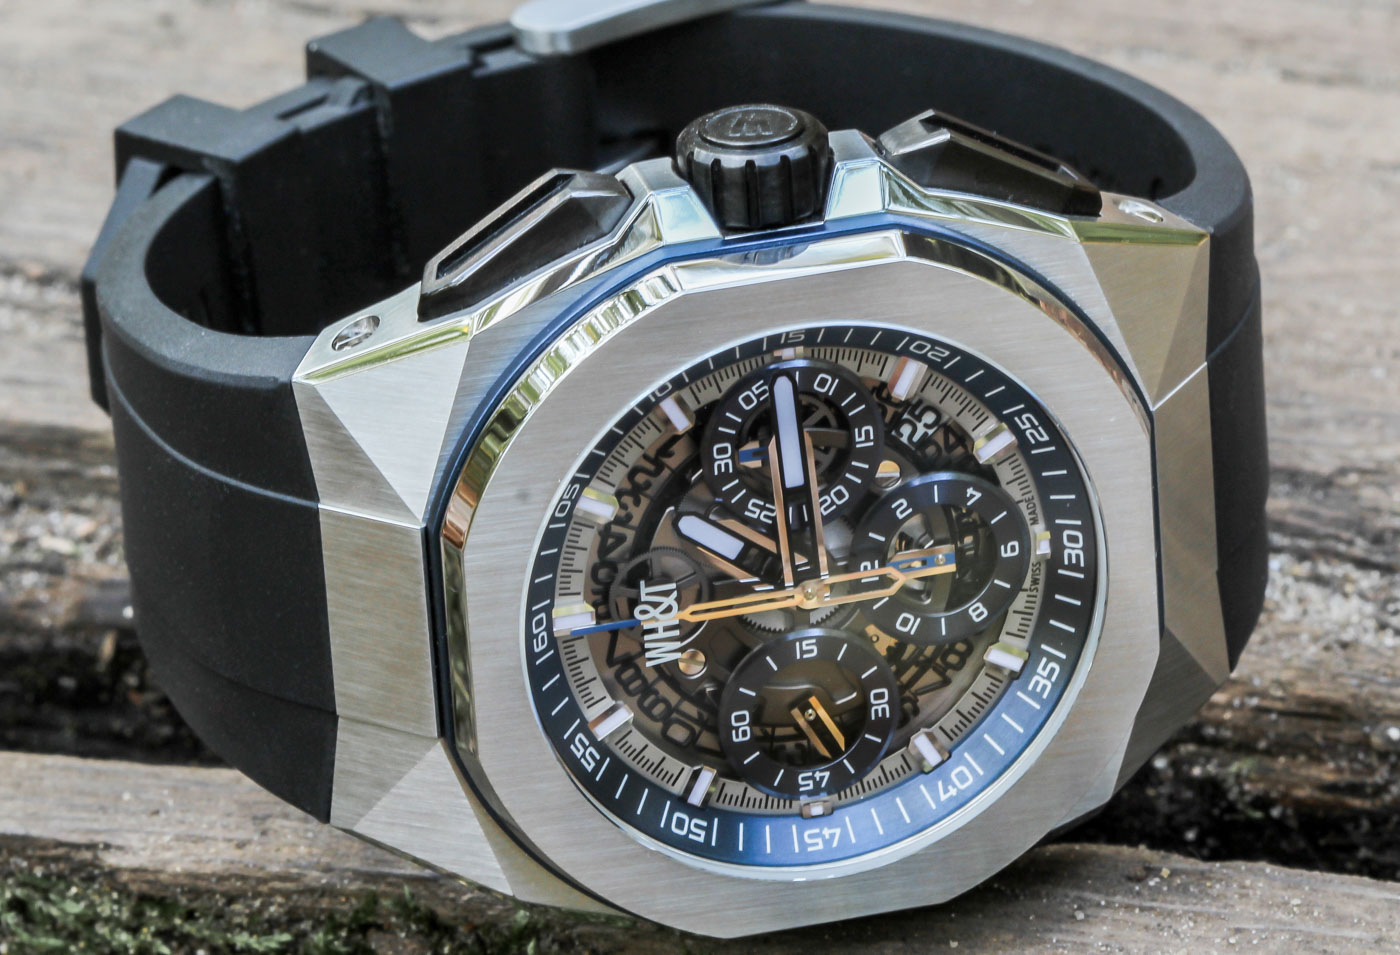 WHAT-LCF888-Chronograph-Watch